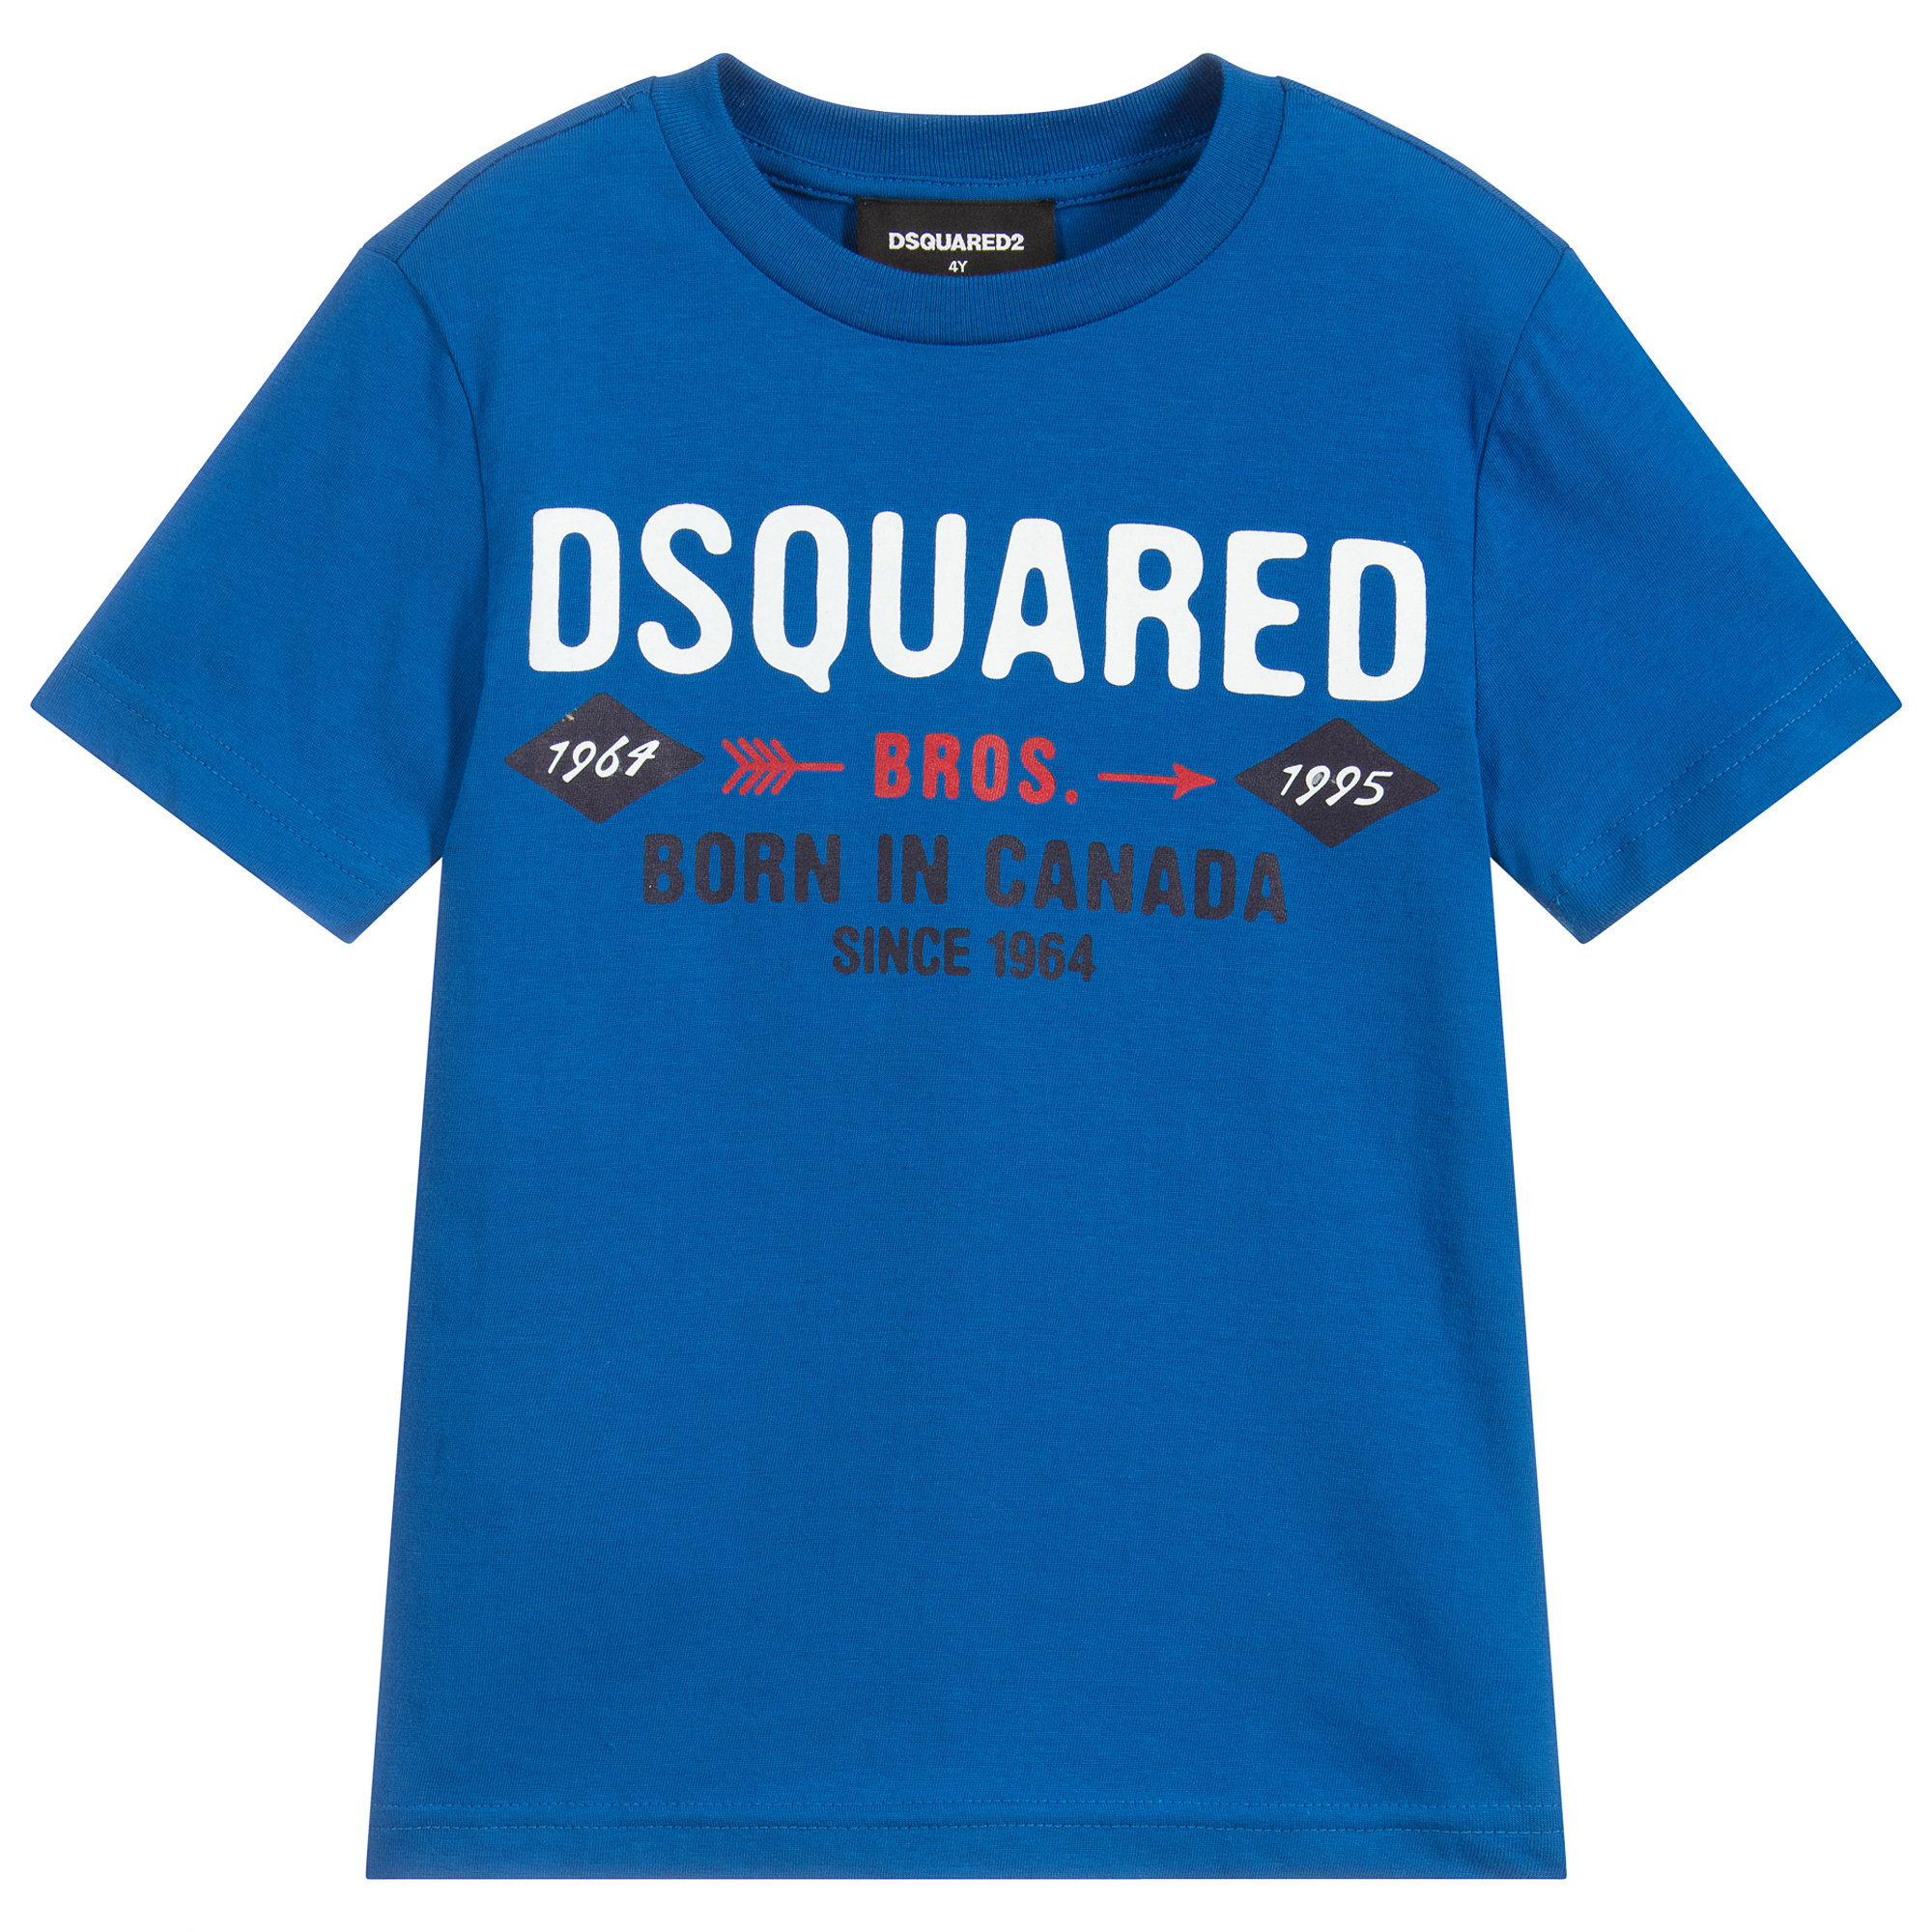 dsquared boys top